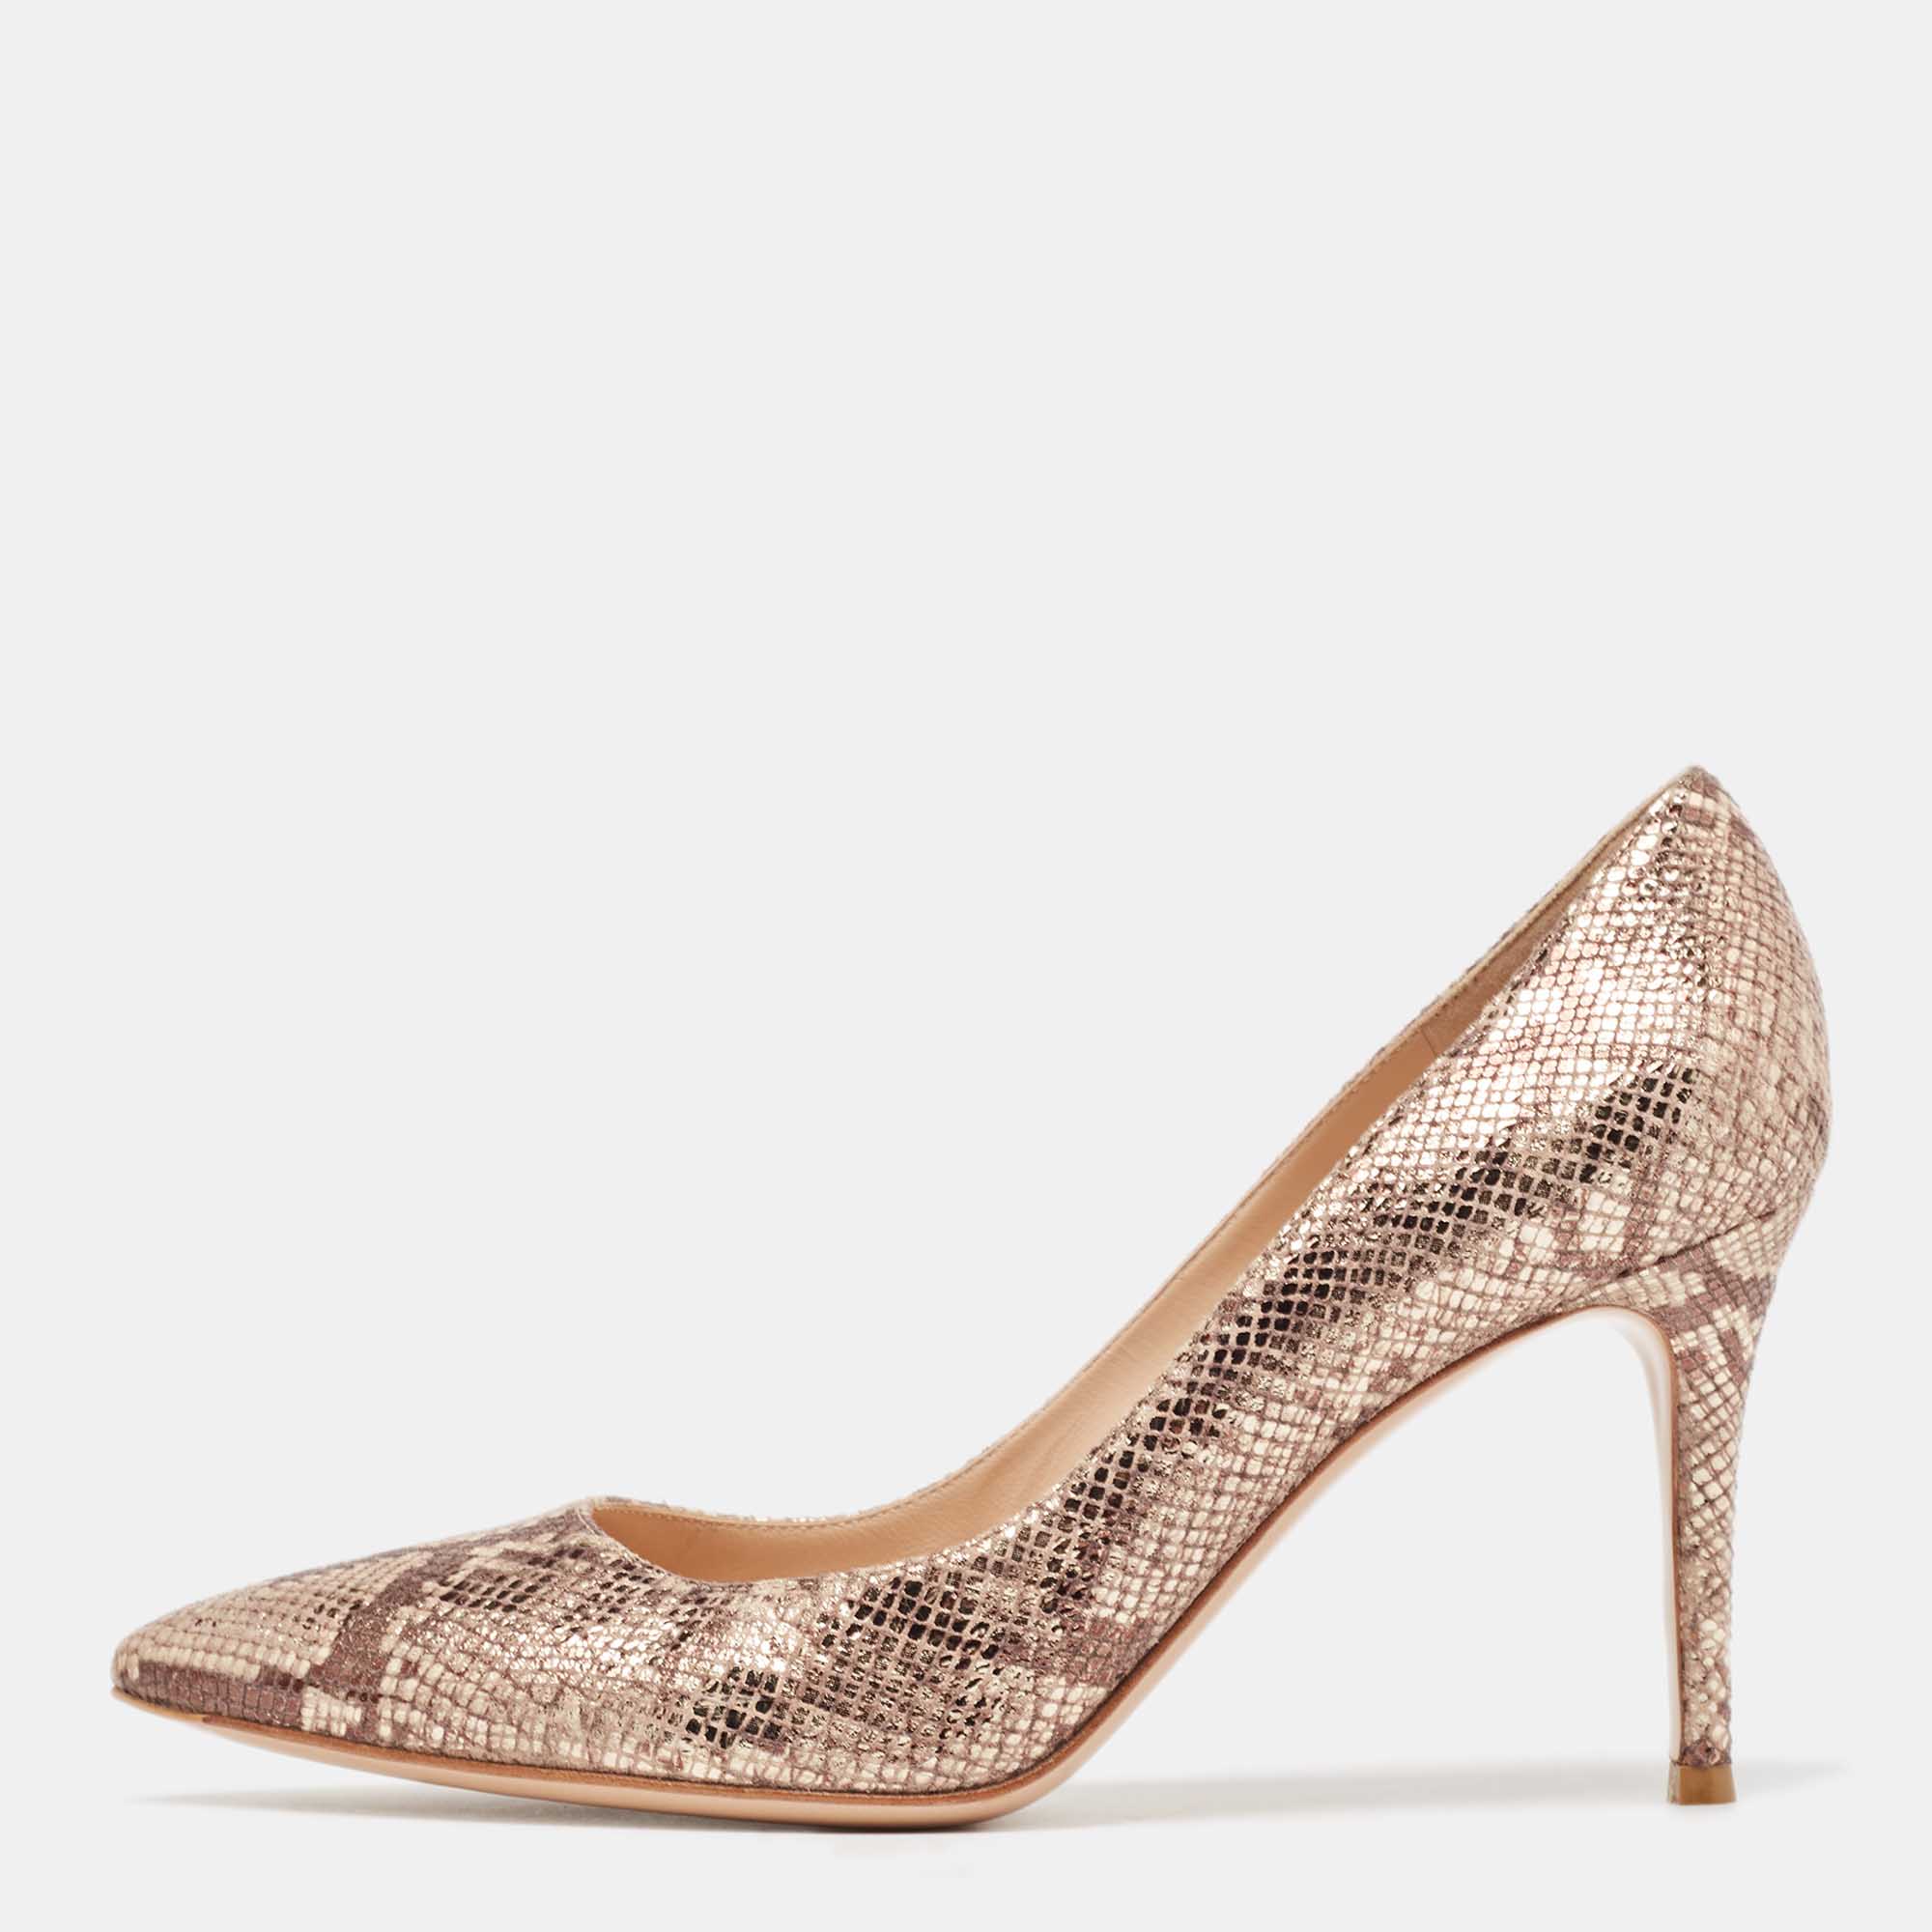 Gianvito rossi beige/brown python embossed leather pointed toe pumps size 39